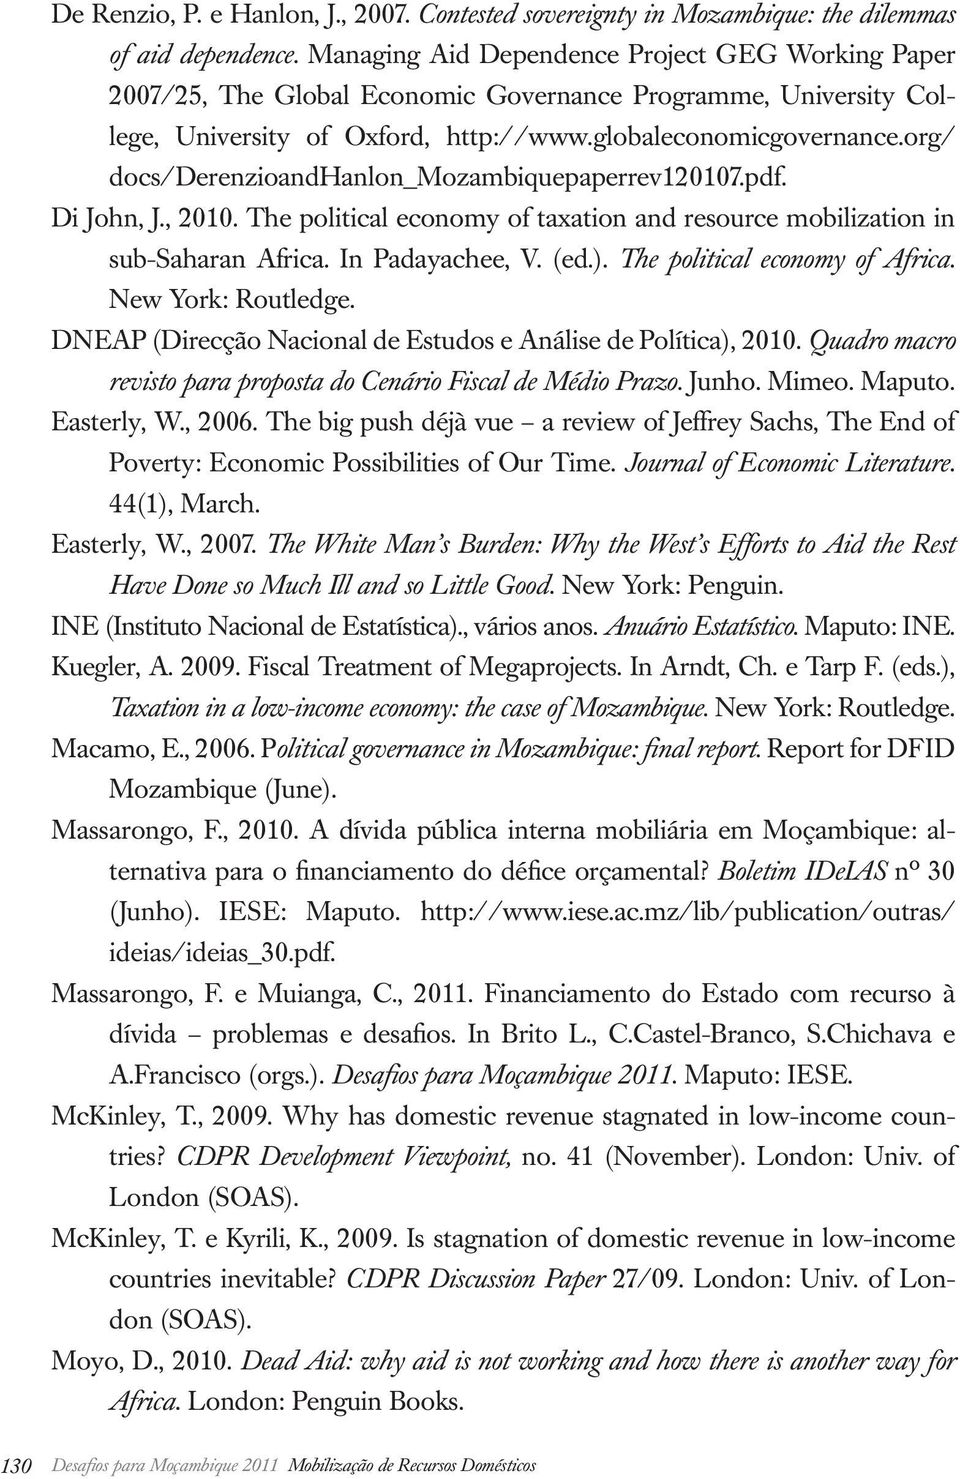 org/ docs/derenzioandhanlon_mozambiquepaperrev120107.pdf. Di John, J., 2010. The political economy of taxation and resource mobilization in sub-saharan Africa. In Padayachee, V. (ed.).